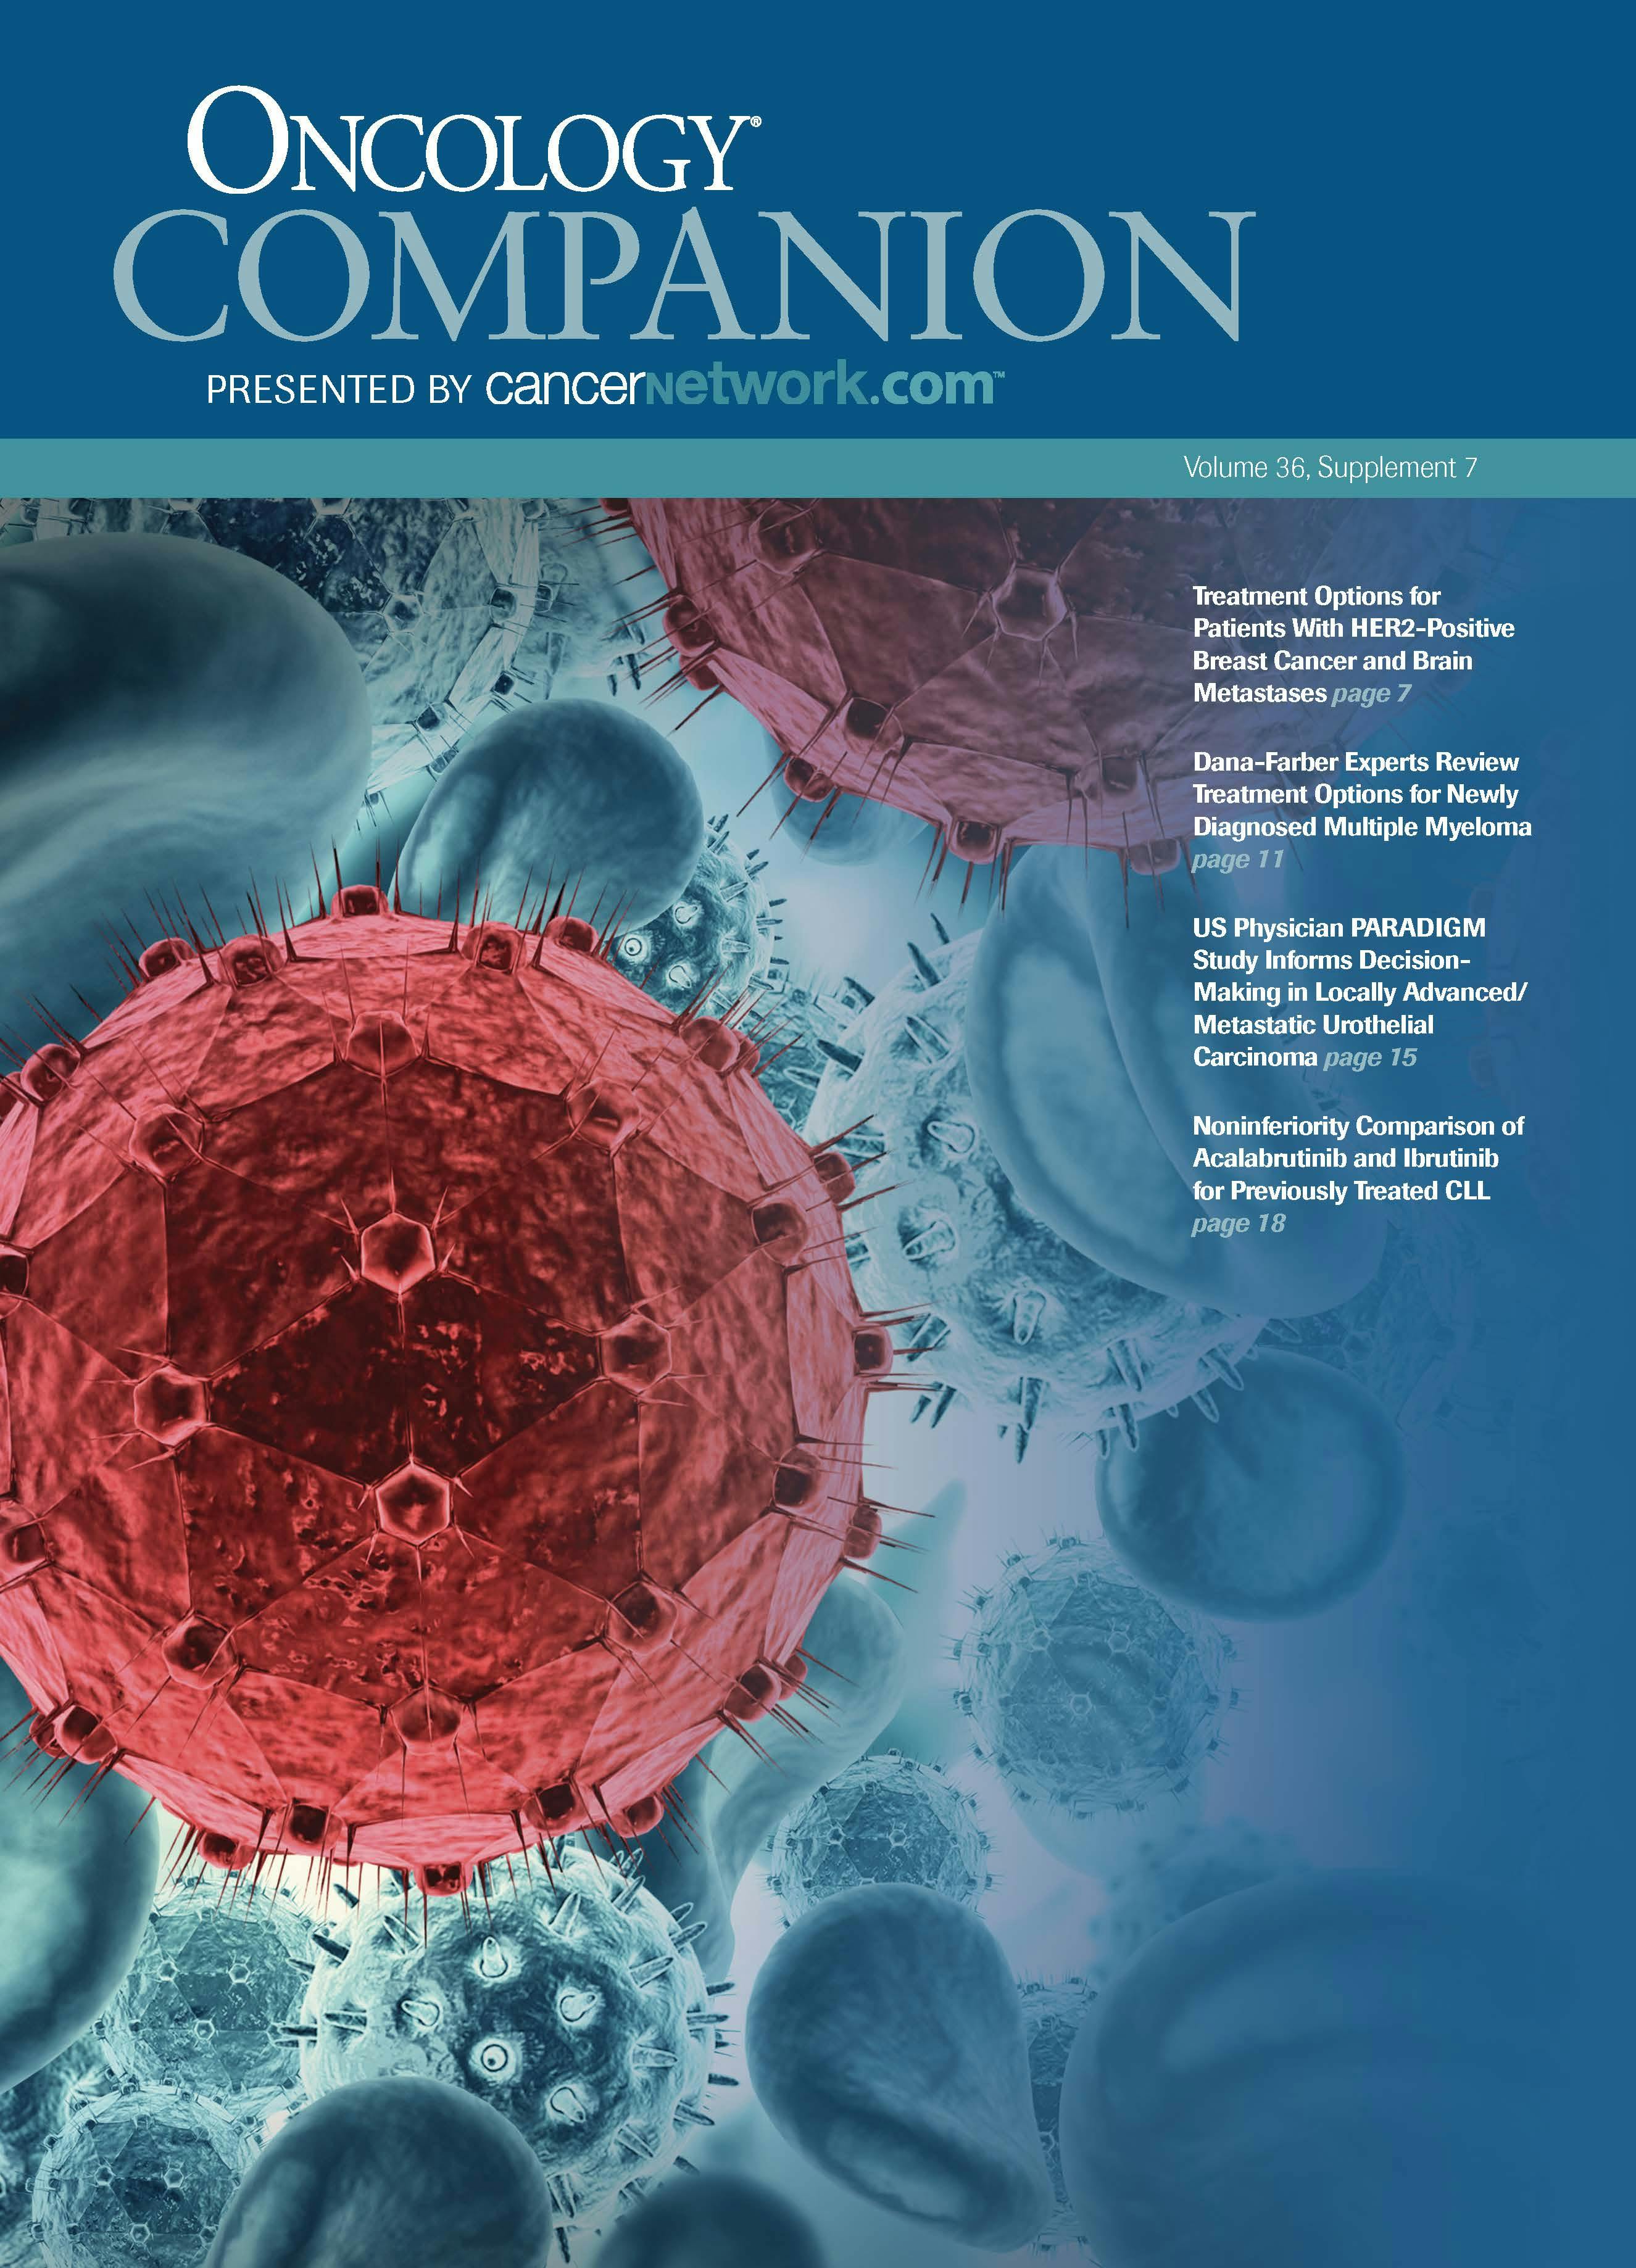 ONCOLOGY® Companion, Volume 36, Supplement 7